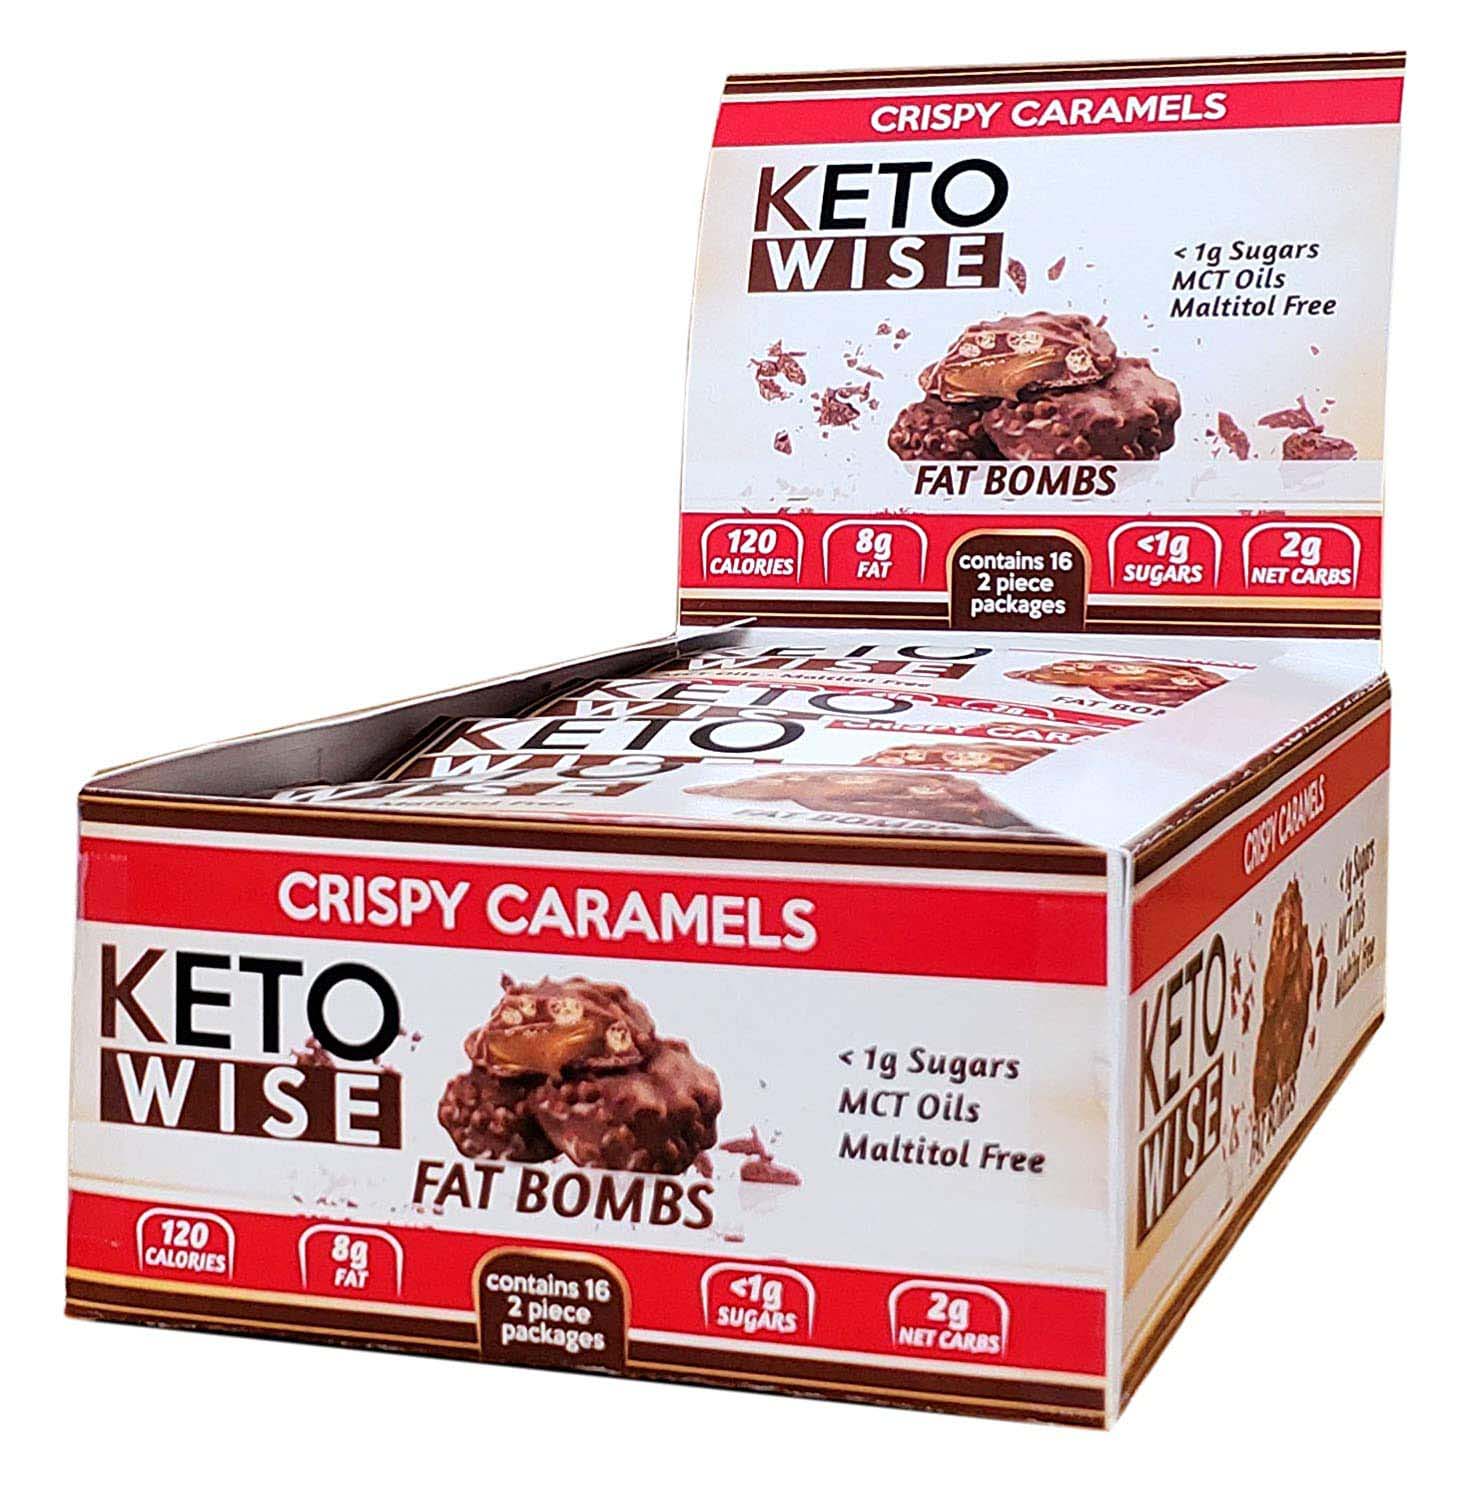 Keto Wise Fat Bombs, Crispy Caramels, Box of 16 Pieces